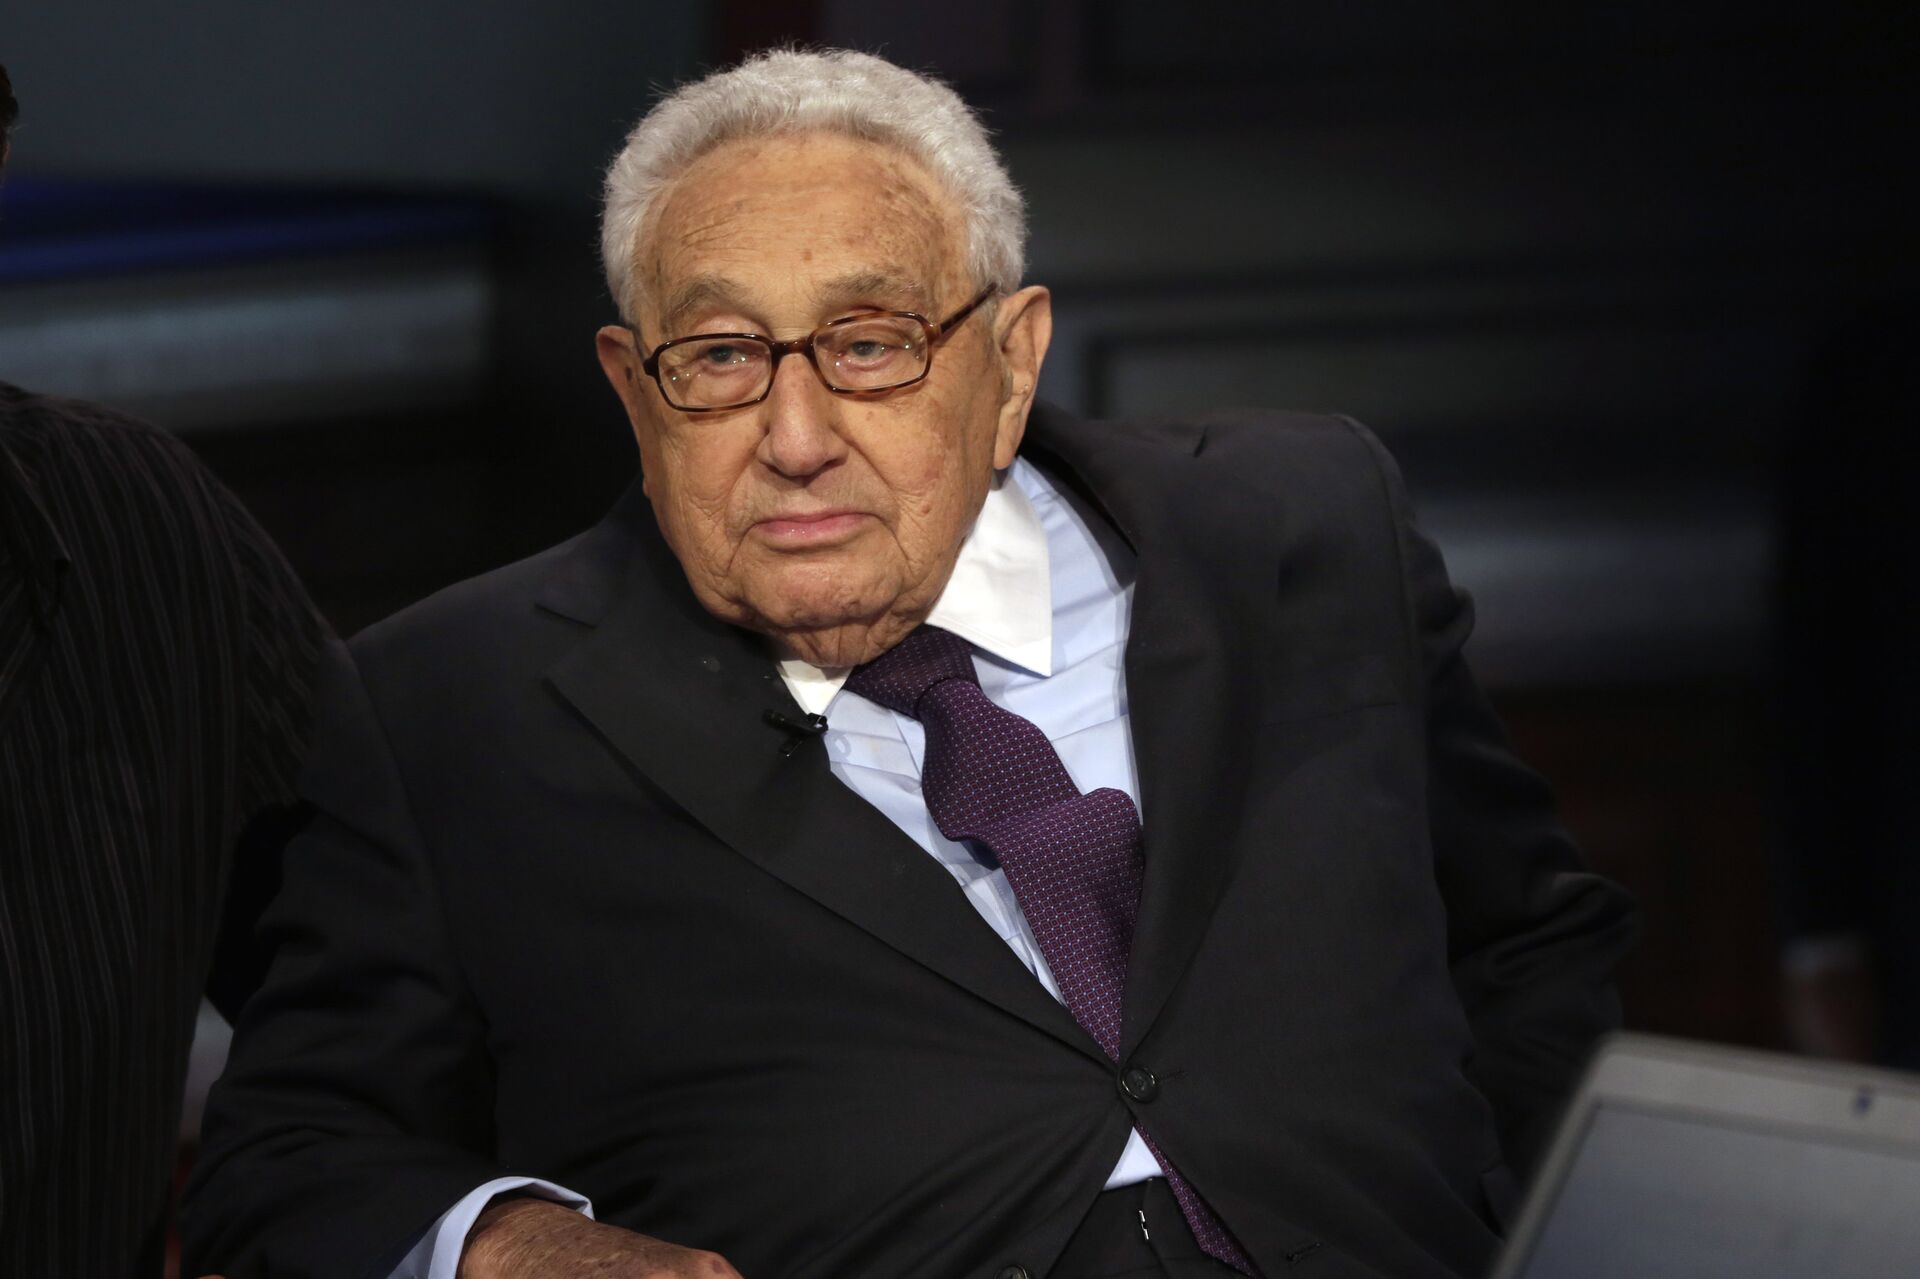 Former U.S. Secretary of State Henry Kissinger is interviewed by Neil Cavuto on his Cavuto Coast to Coast program, on the Fox Business Network, in New York, Friday, June 5, 2015 - Sputnik International, 1920, 28.05.2022